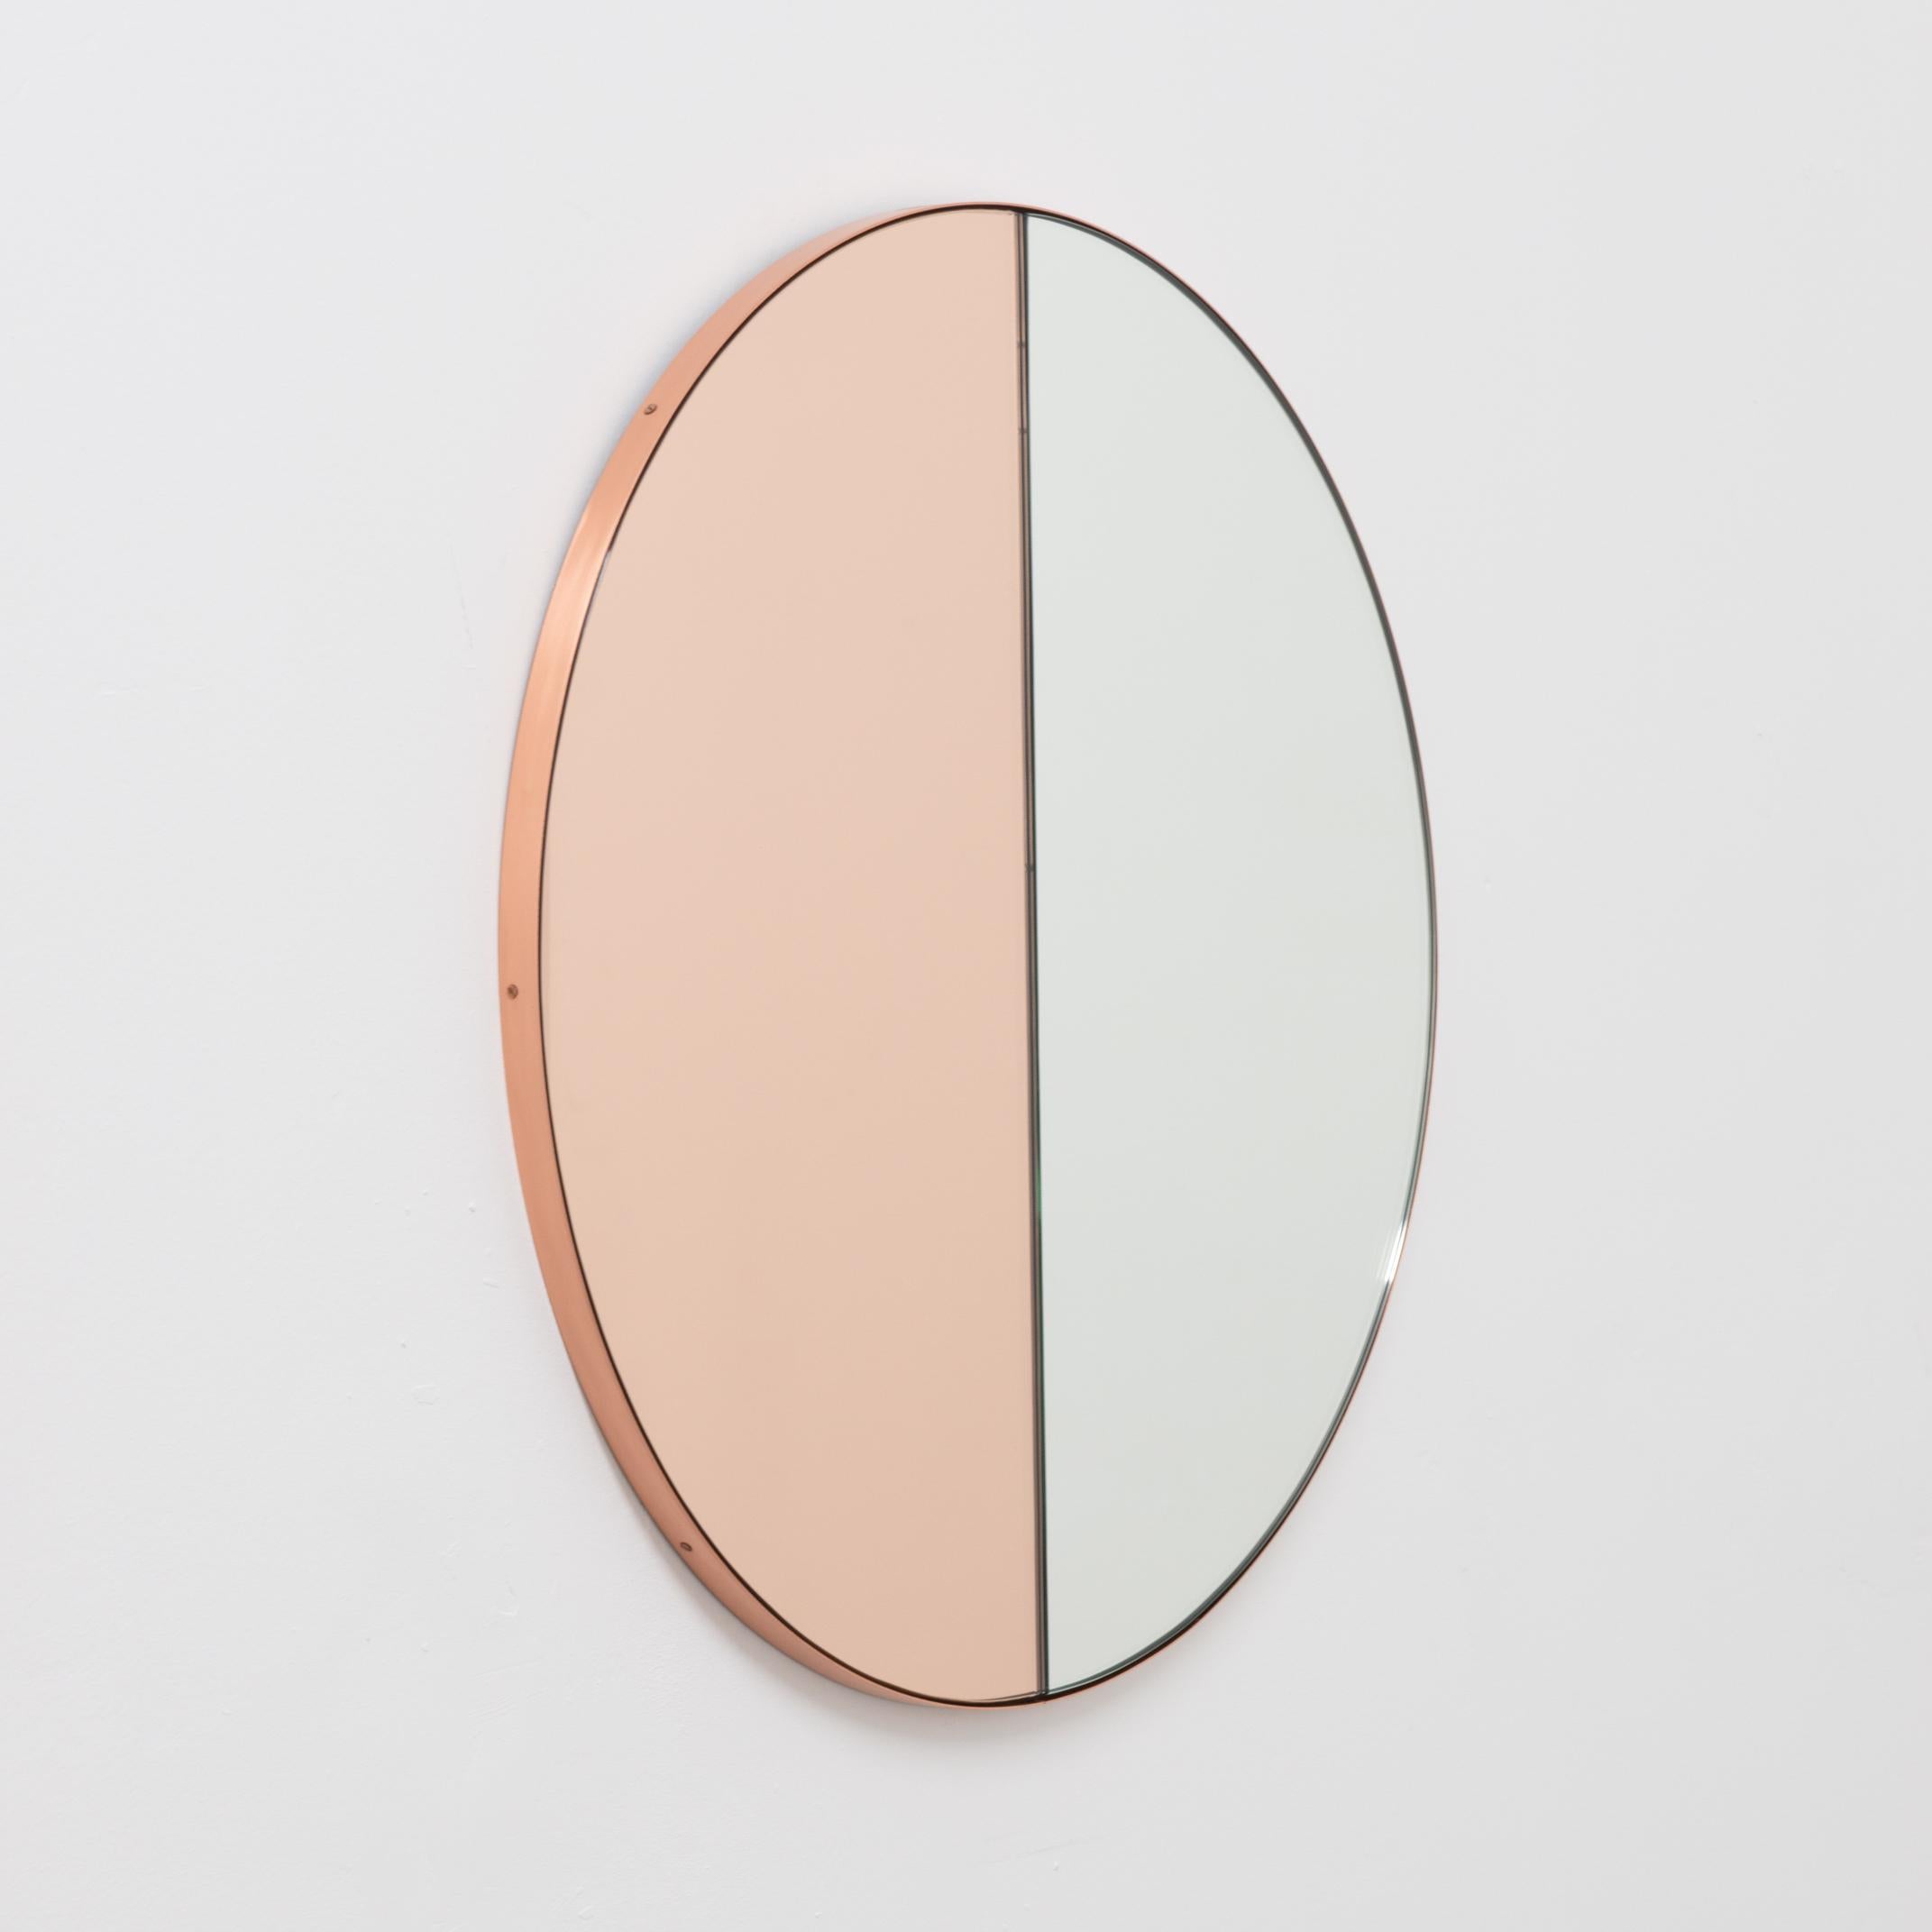 Contemporary mixed tinted (silver & rose gold / peach) Orbis Dualis mirror with a chic copper frame. Designed and handcrafted in London, UK.

Supplied fully fitted with a specialist hanging system that allows the mirror to be hung in four different